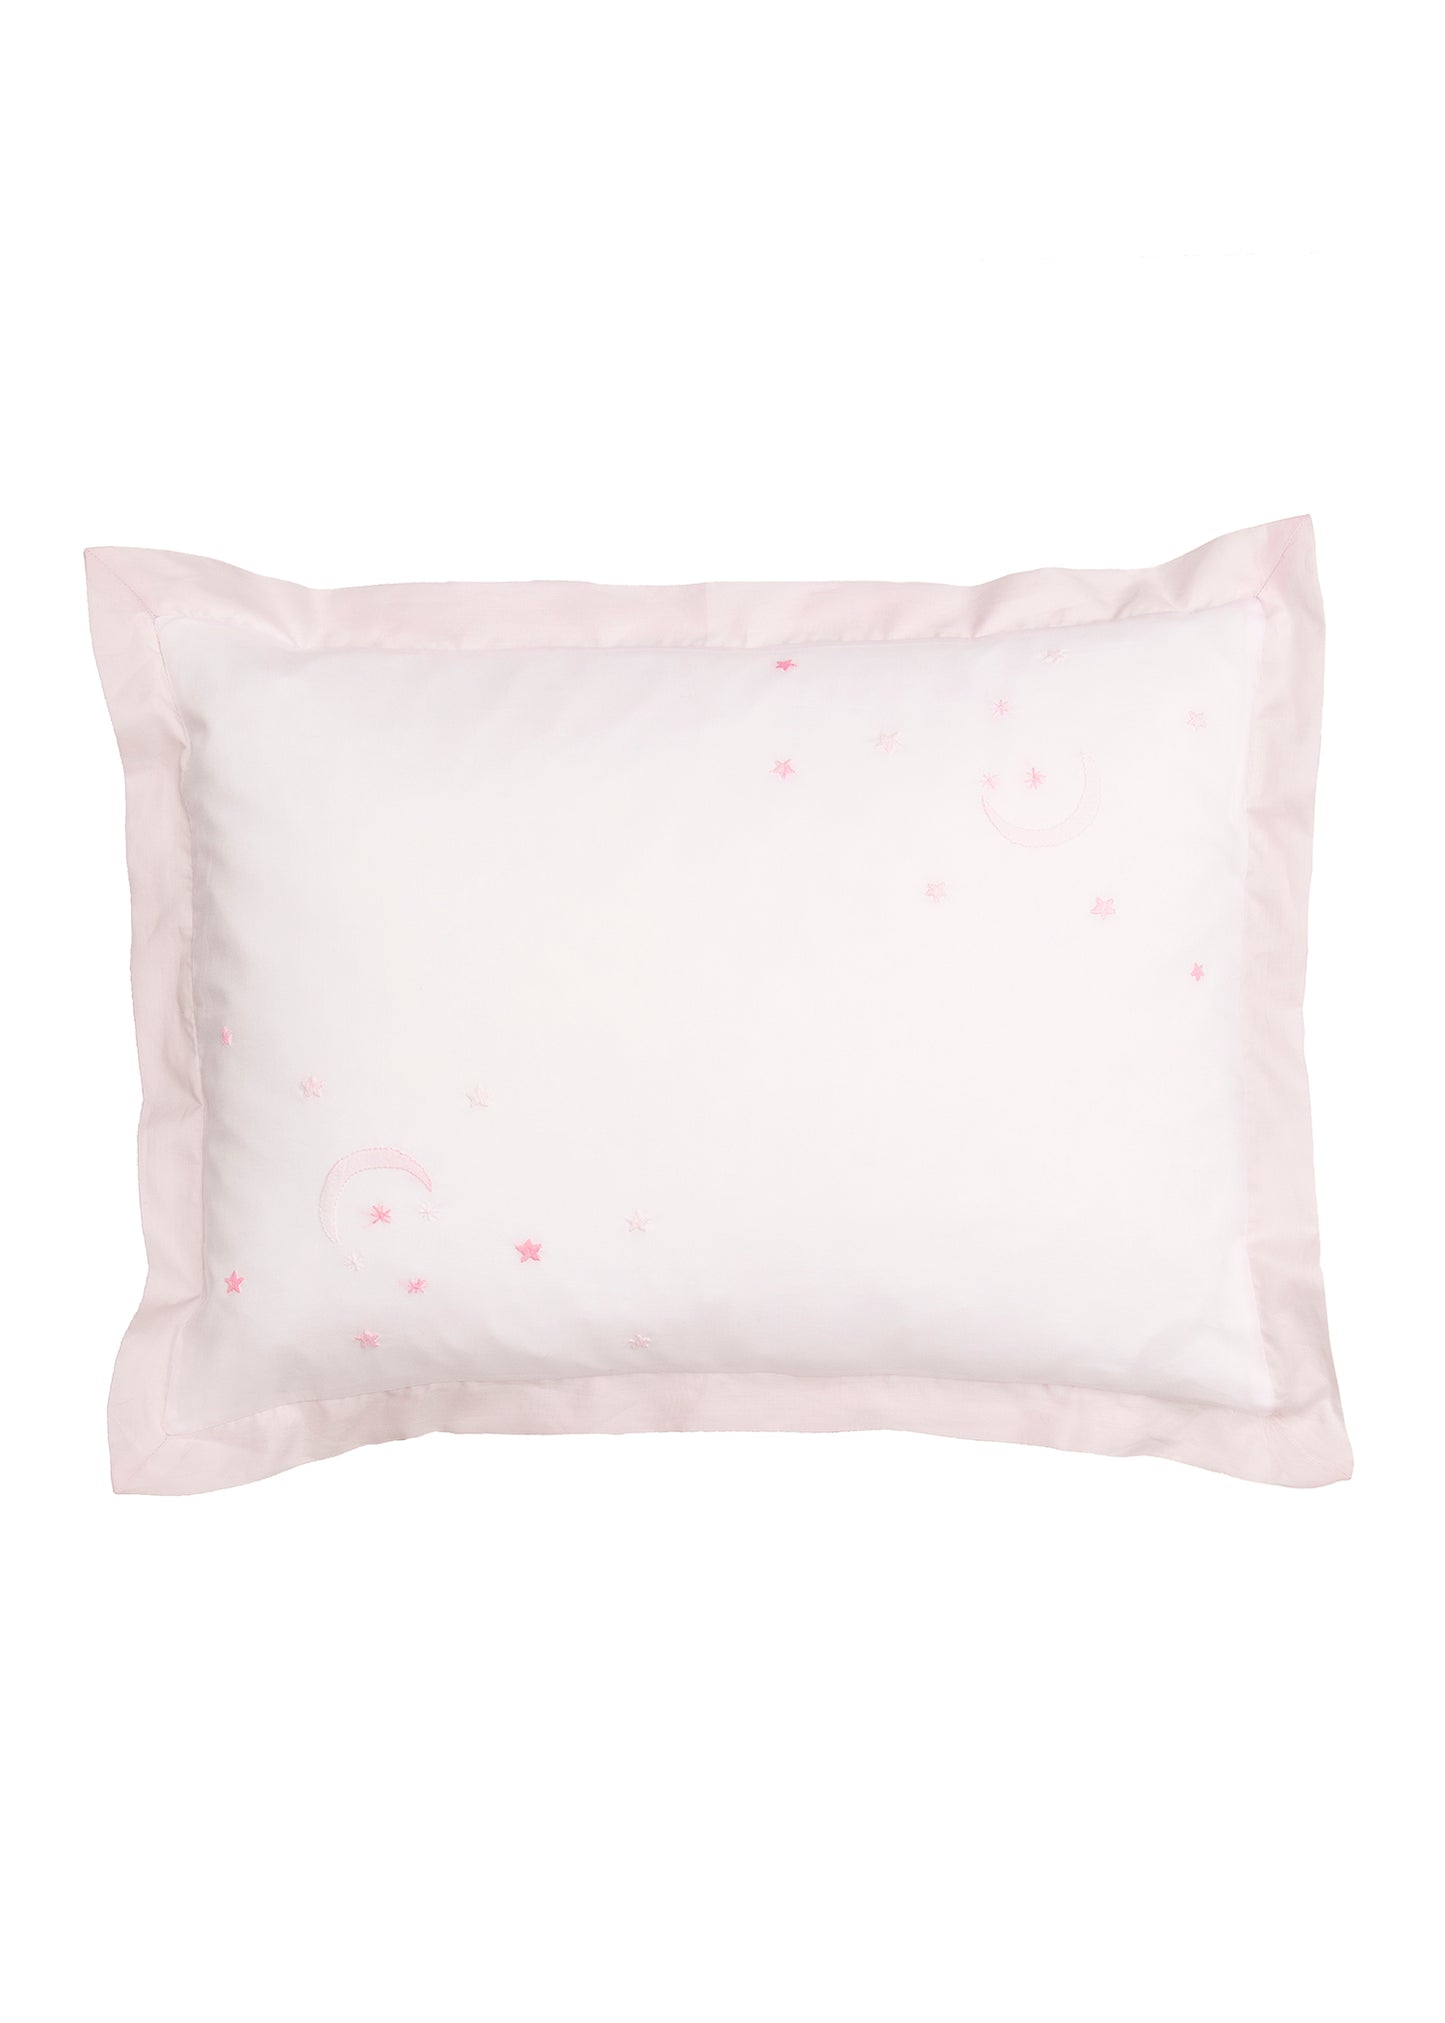 Over The Moon Pillow Sham (insert not included)